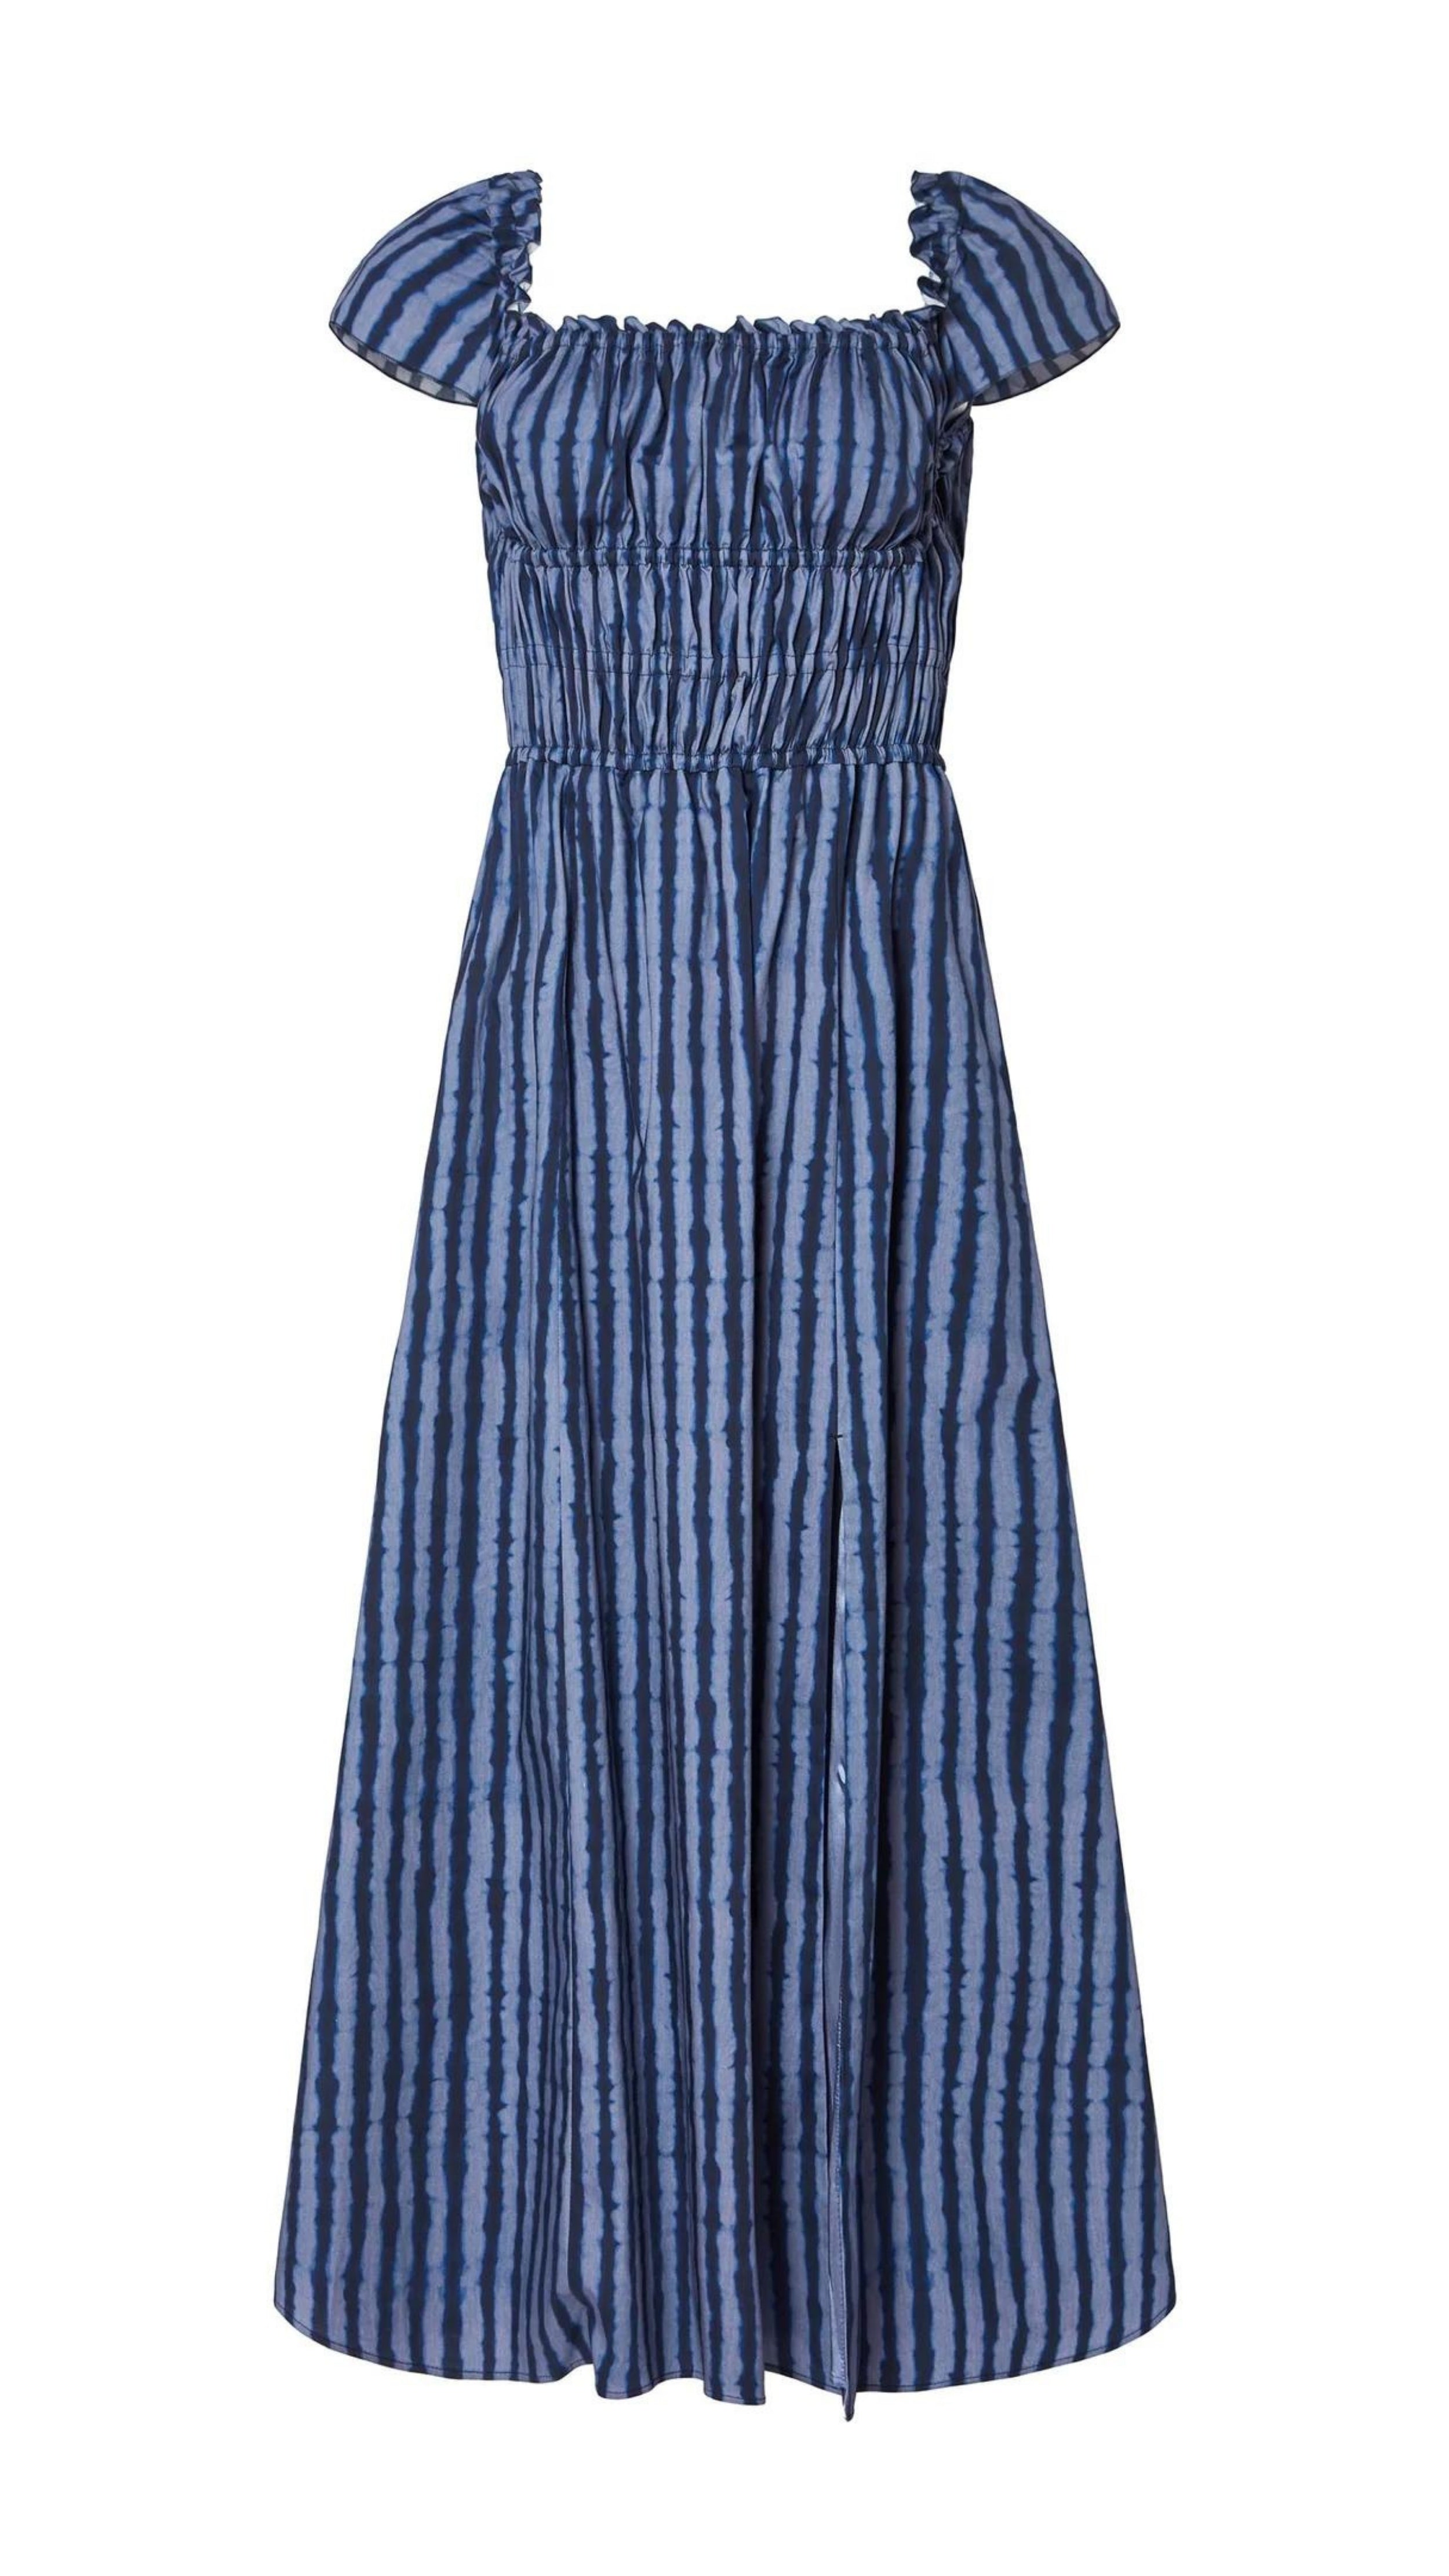 Altuzarra Lily Dress The &#39;Lily&#39; dressmade from soft cotton. The midi dress  features a smocked construction and off-the-shoulder design. It has hidden pockets and a side slit in the skirt. In tones of blue. Product photo flat.